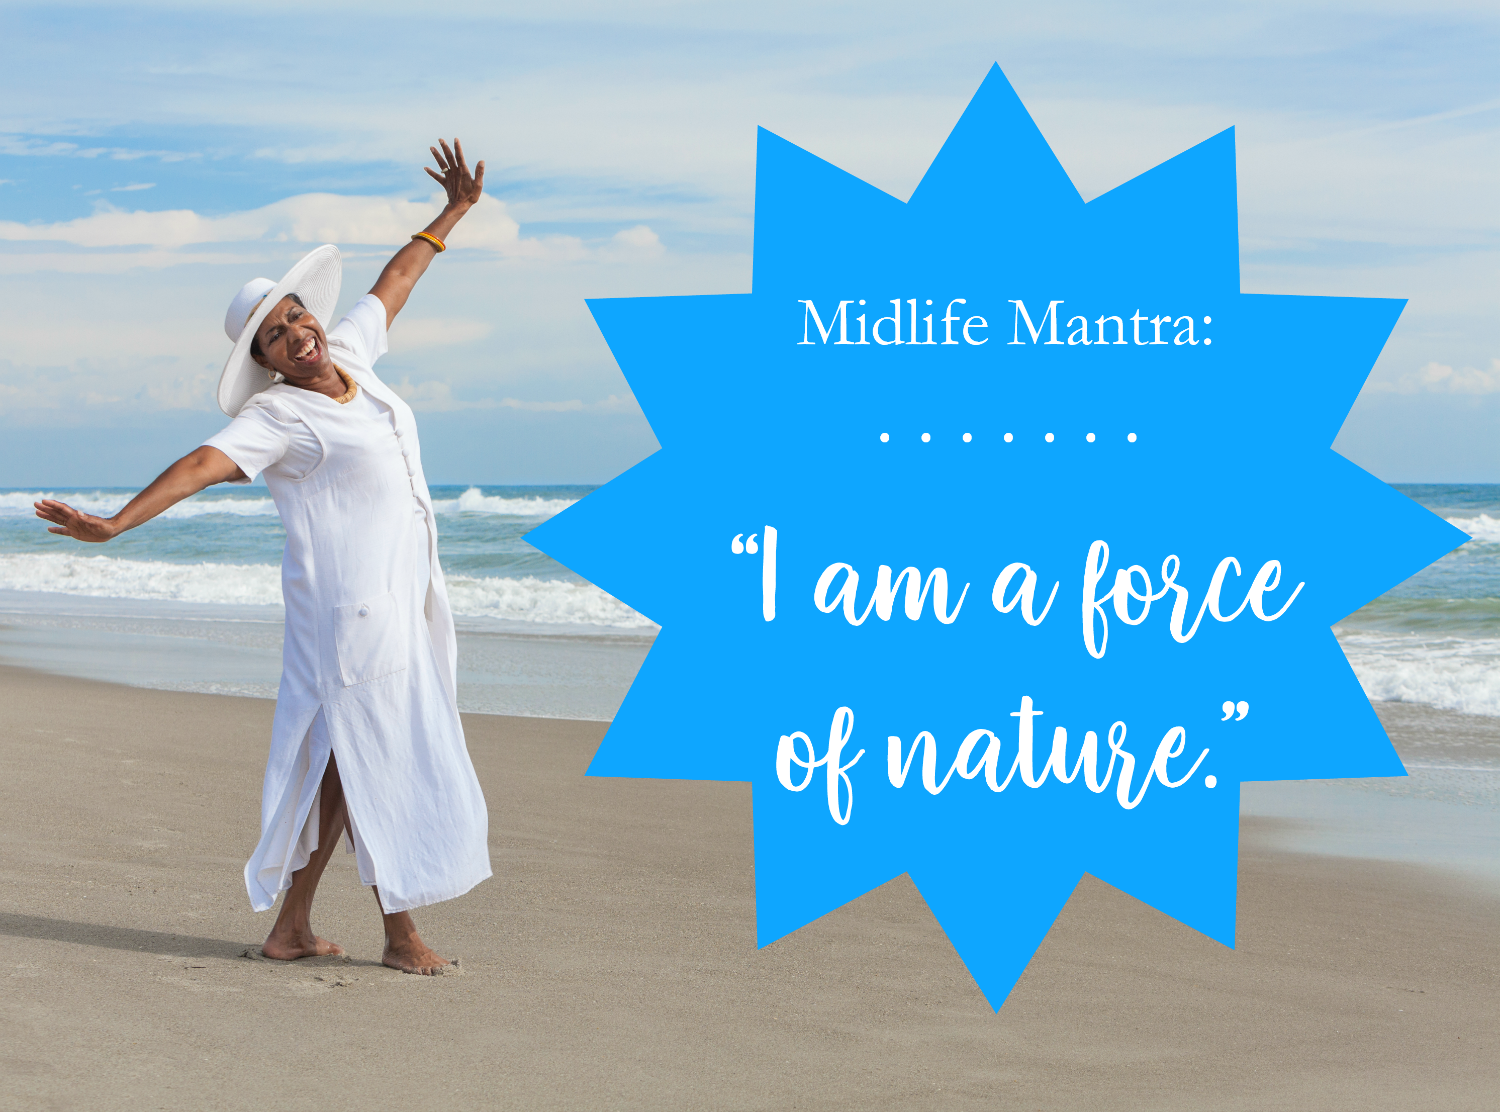 MIDLIFE MANTRA: A Force of Nature…